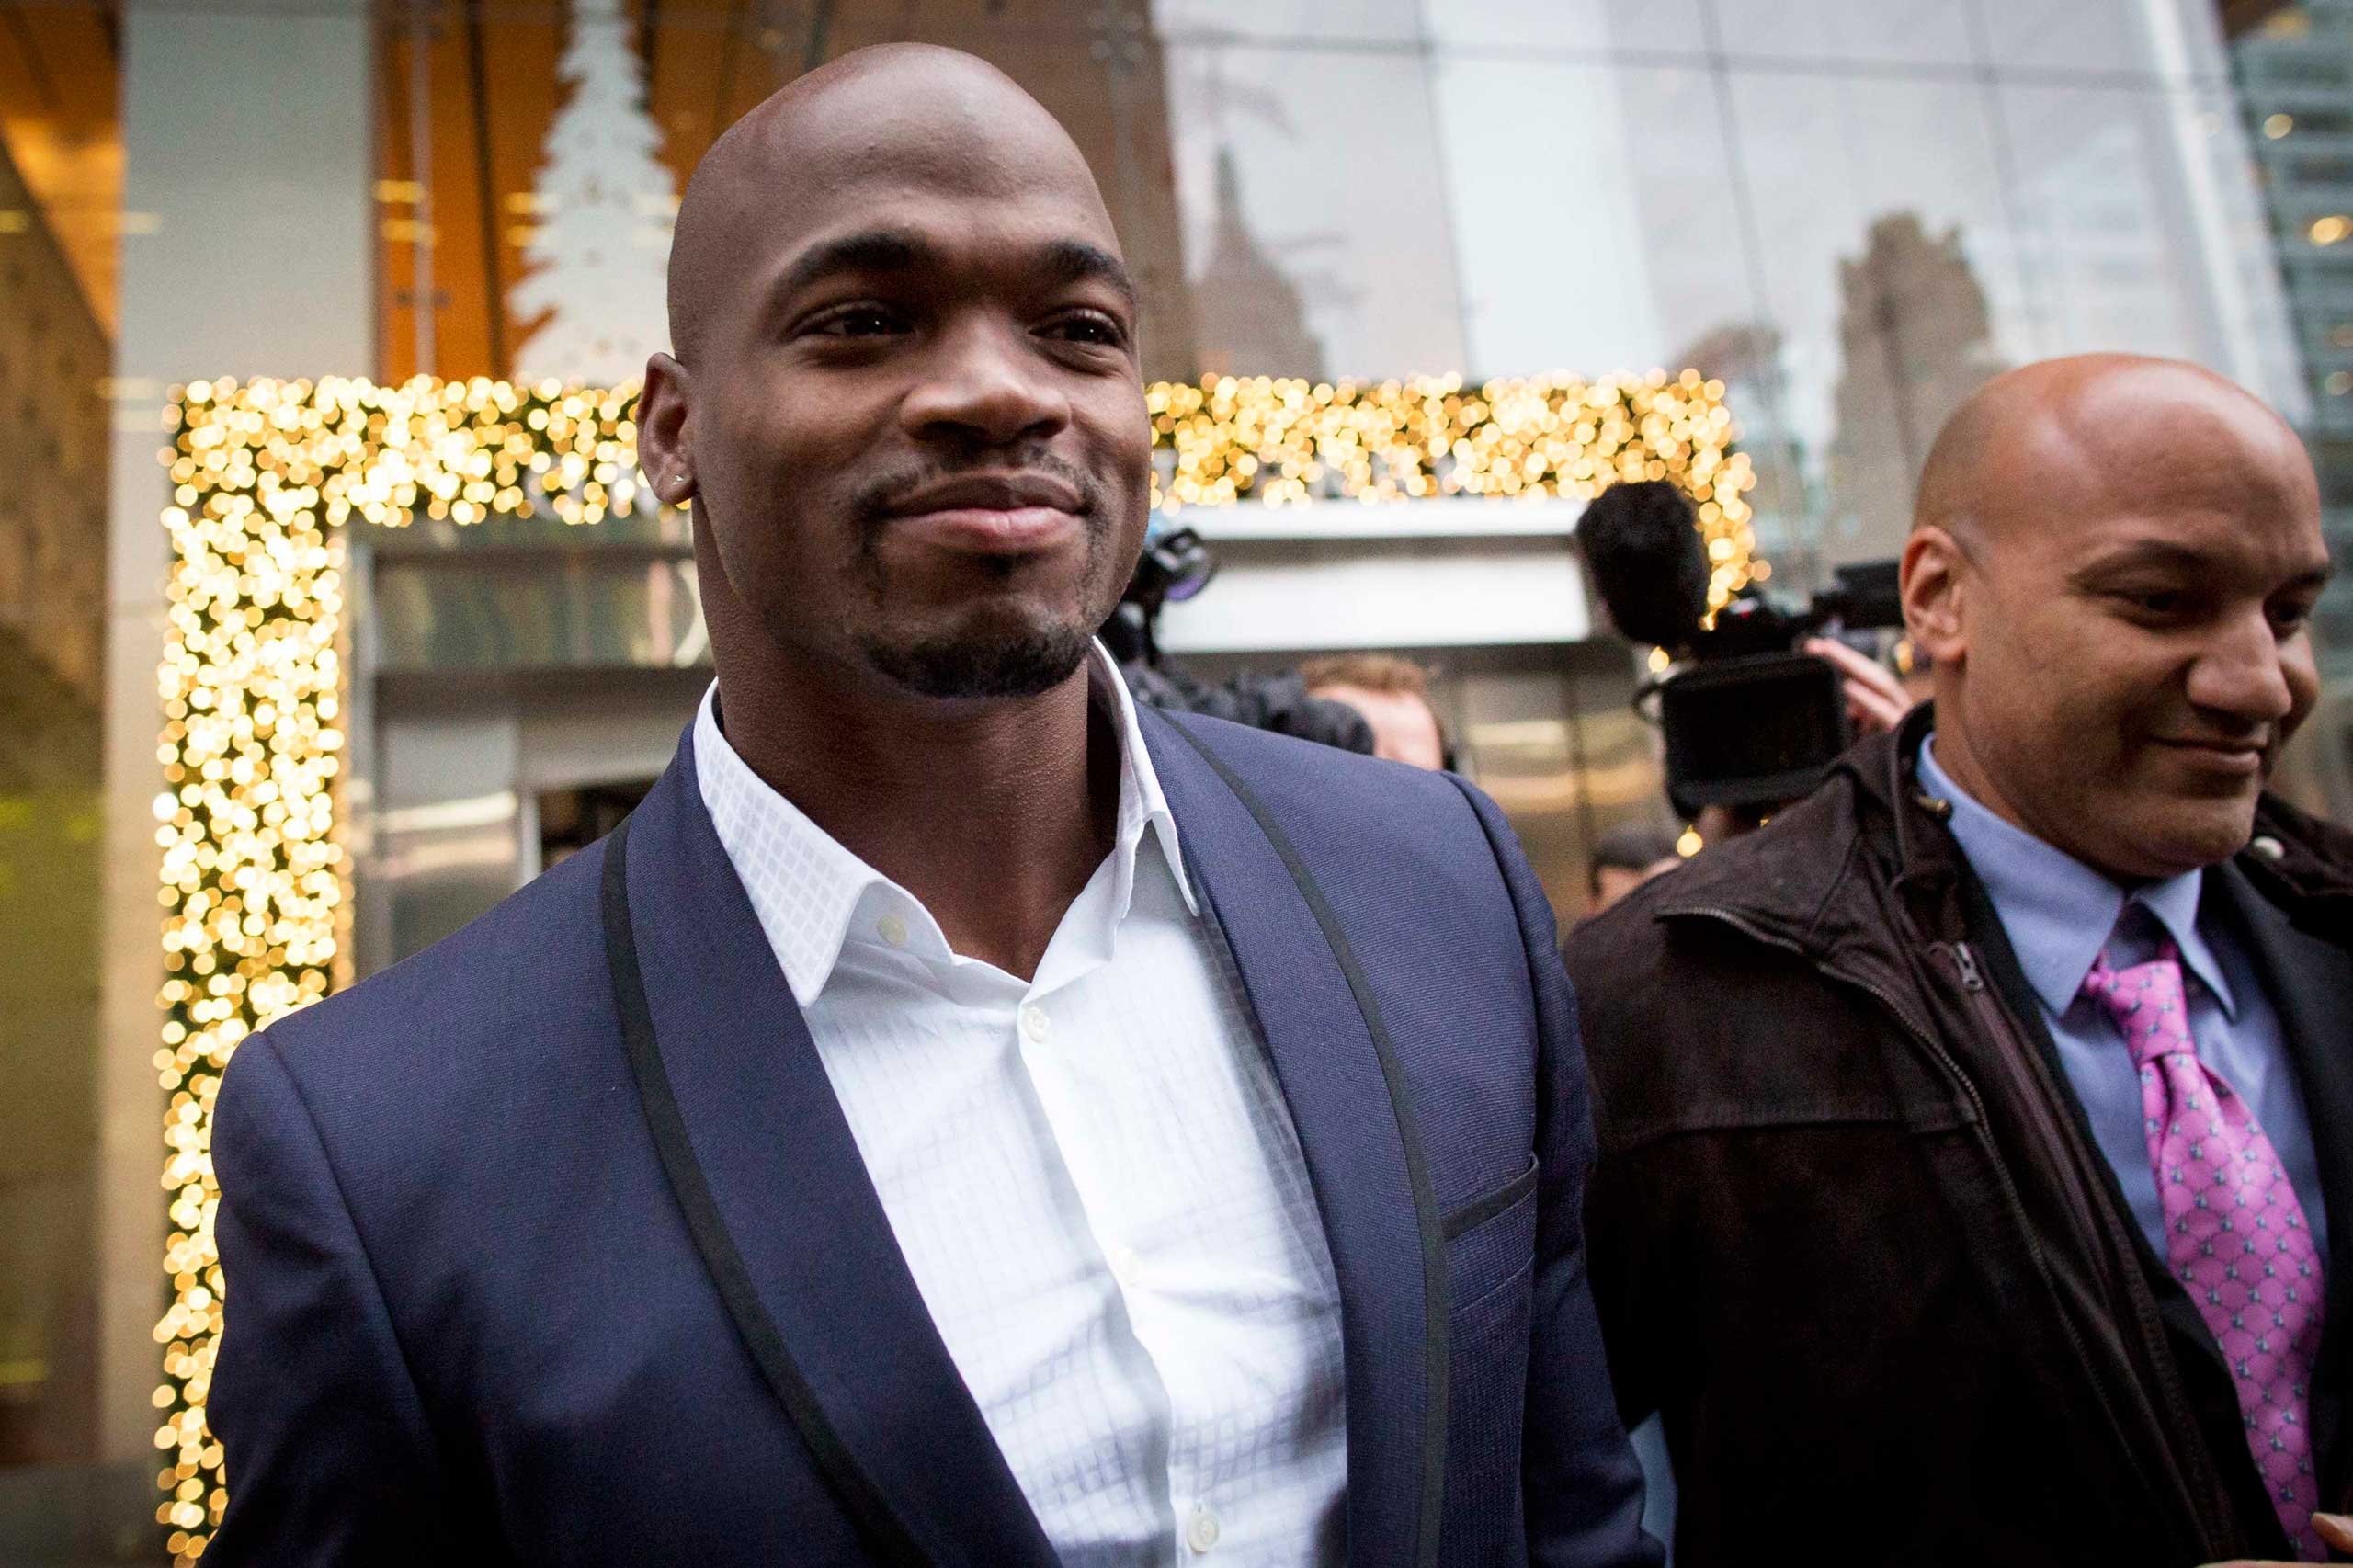 Suspended Minnesota Vikings running back Adrian Peterson (L) exits following his hearing against the NFL over his punishment for child abuse, in  New York City on Dec. 2, 2014. (Brendan McDermid—Reuters)